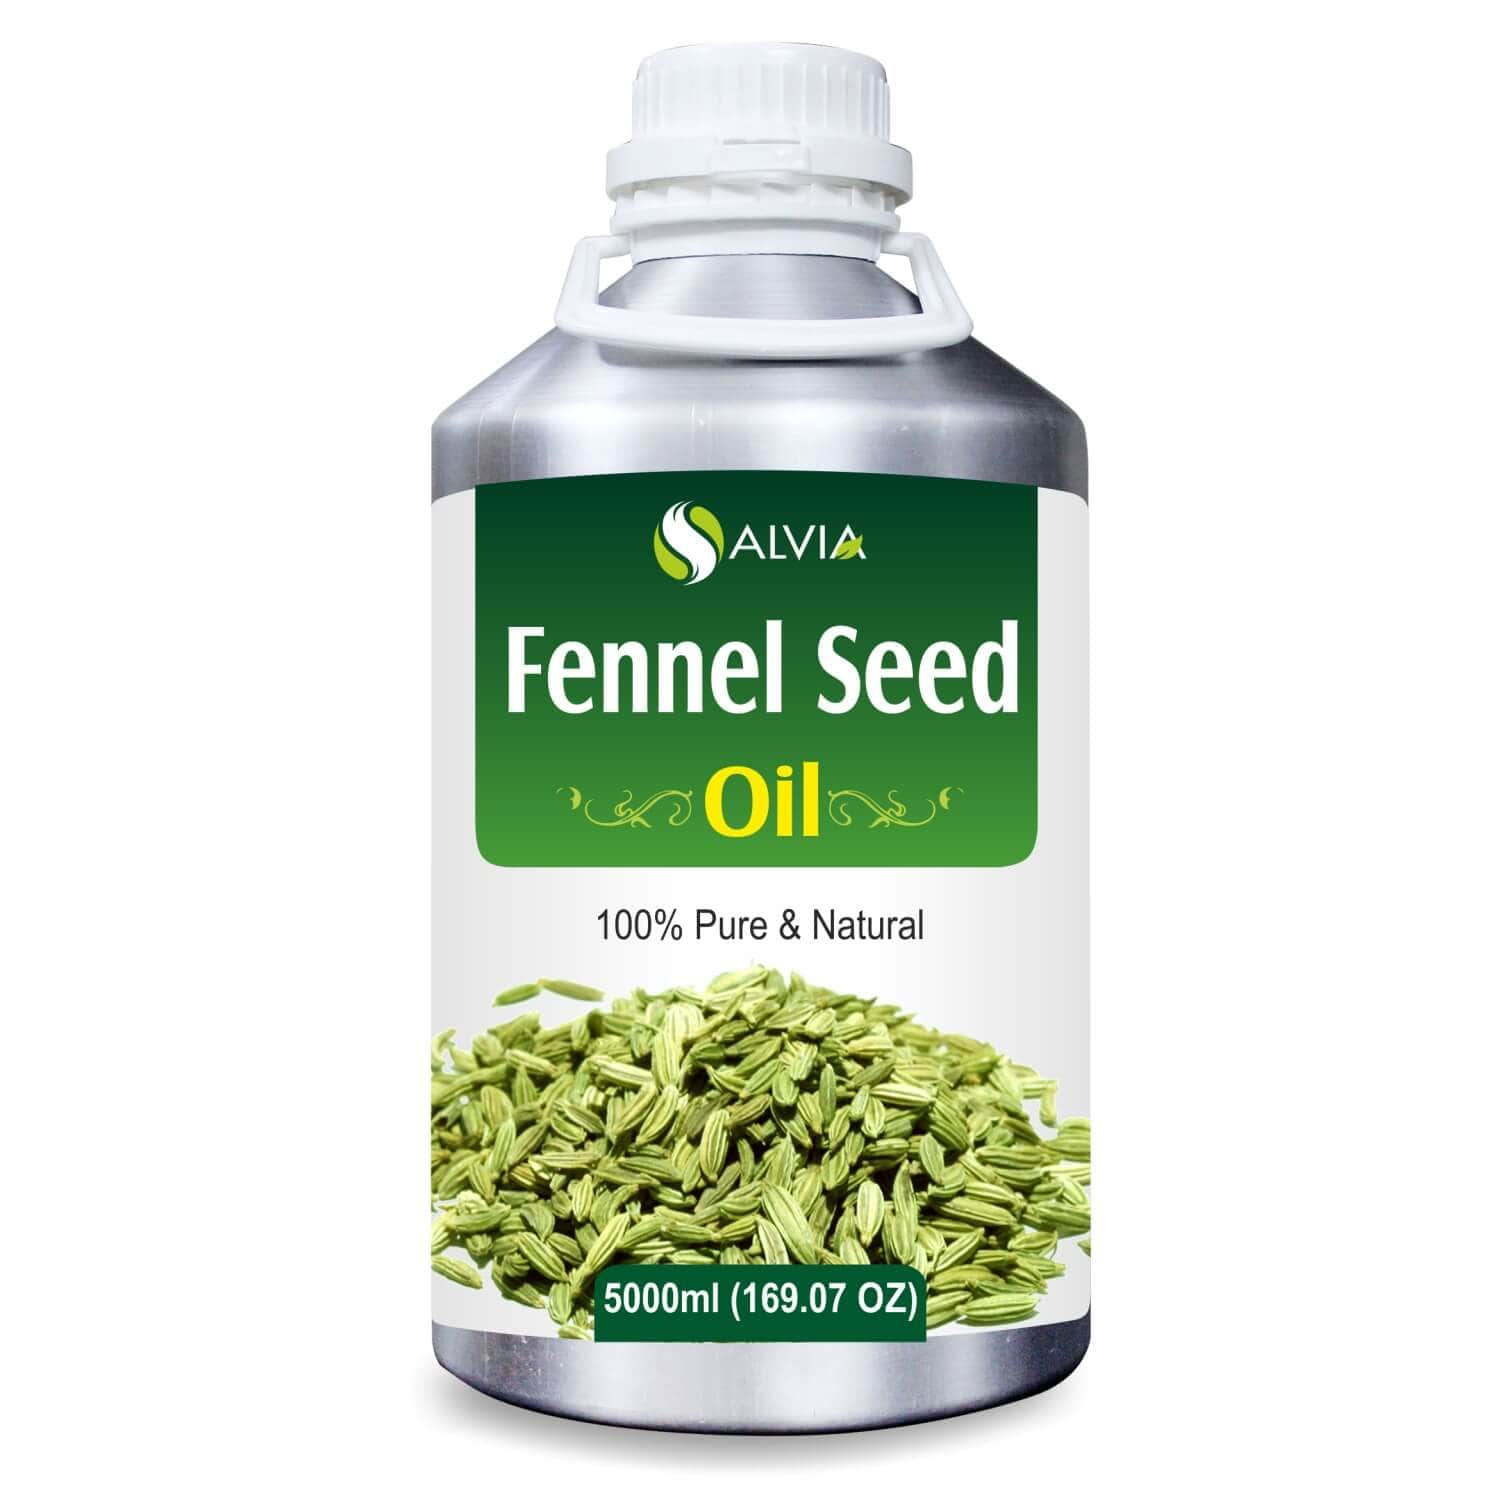 Salvia Natural Essential Oils 5000ml Fennel Seed Oil (Foeniculum vulgare) 100% Natural Pure Essential Oil Keeps Scalp Healthy, Improves Skin’s Texture, Antioxidants, Reduces Acne, Relaxes Muscles